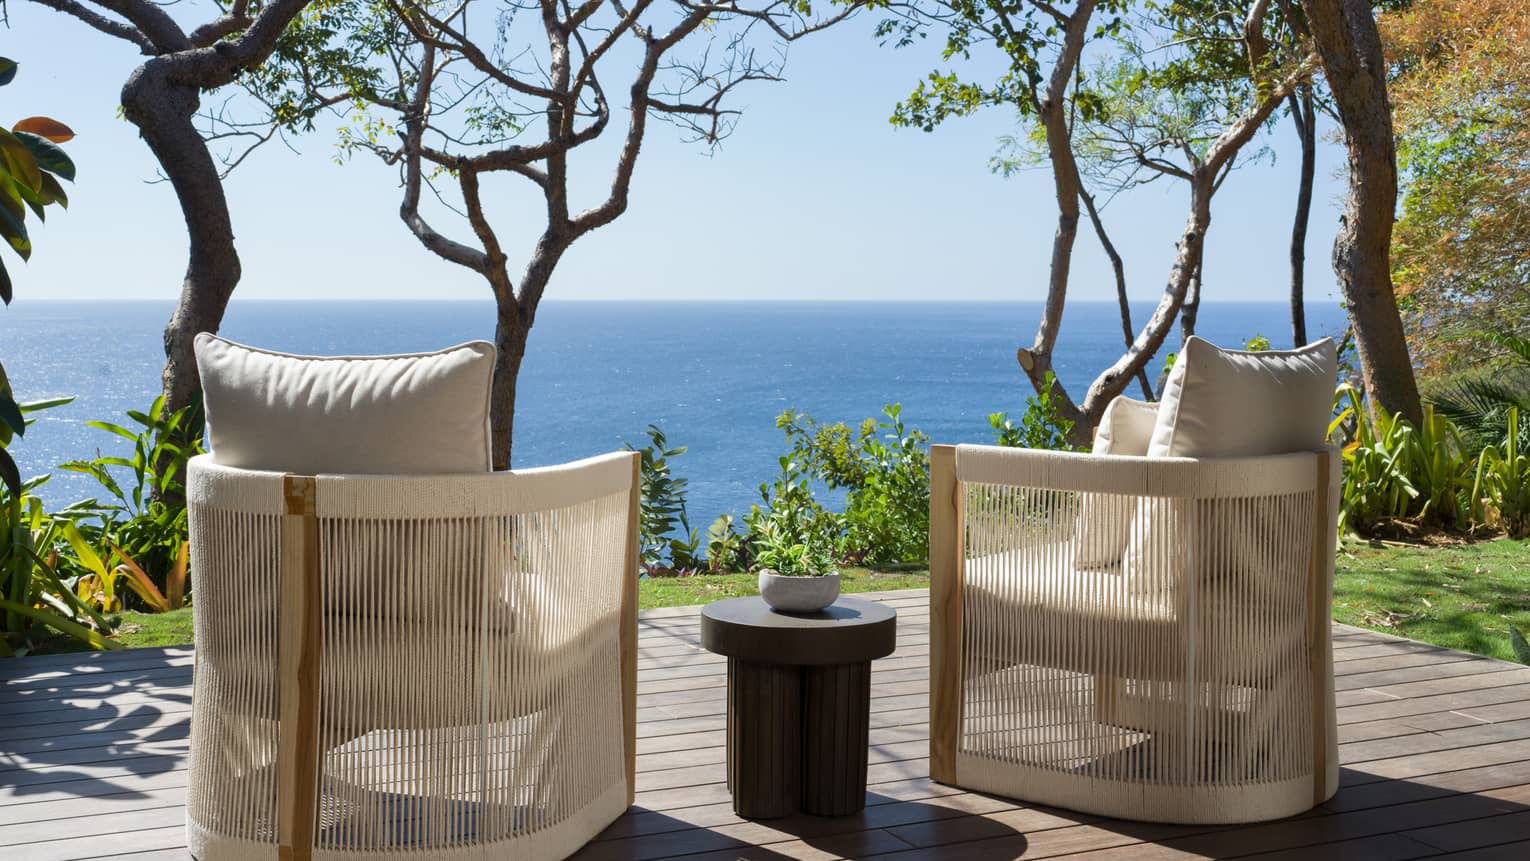 Two chairs on wooden deck facing the ocean